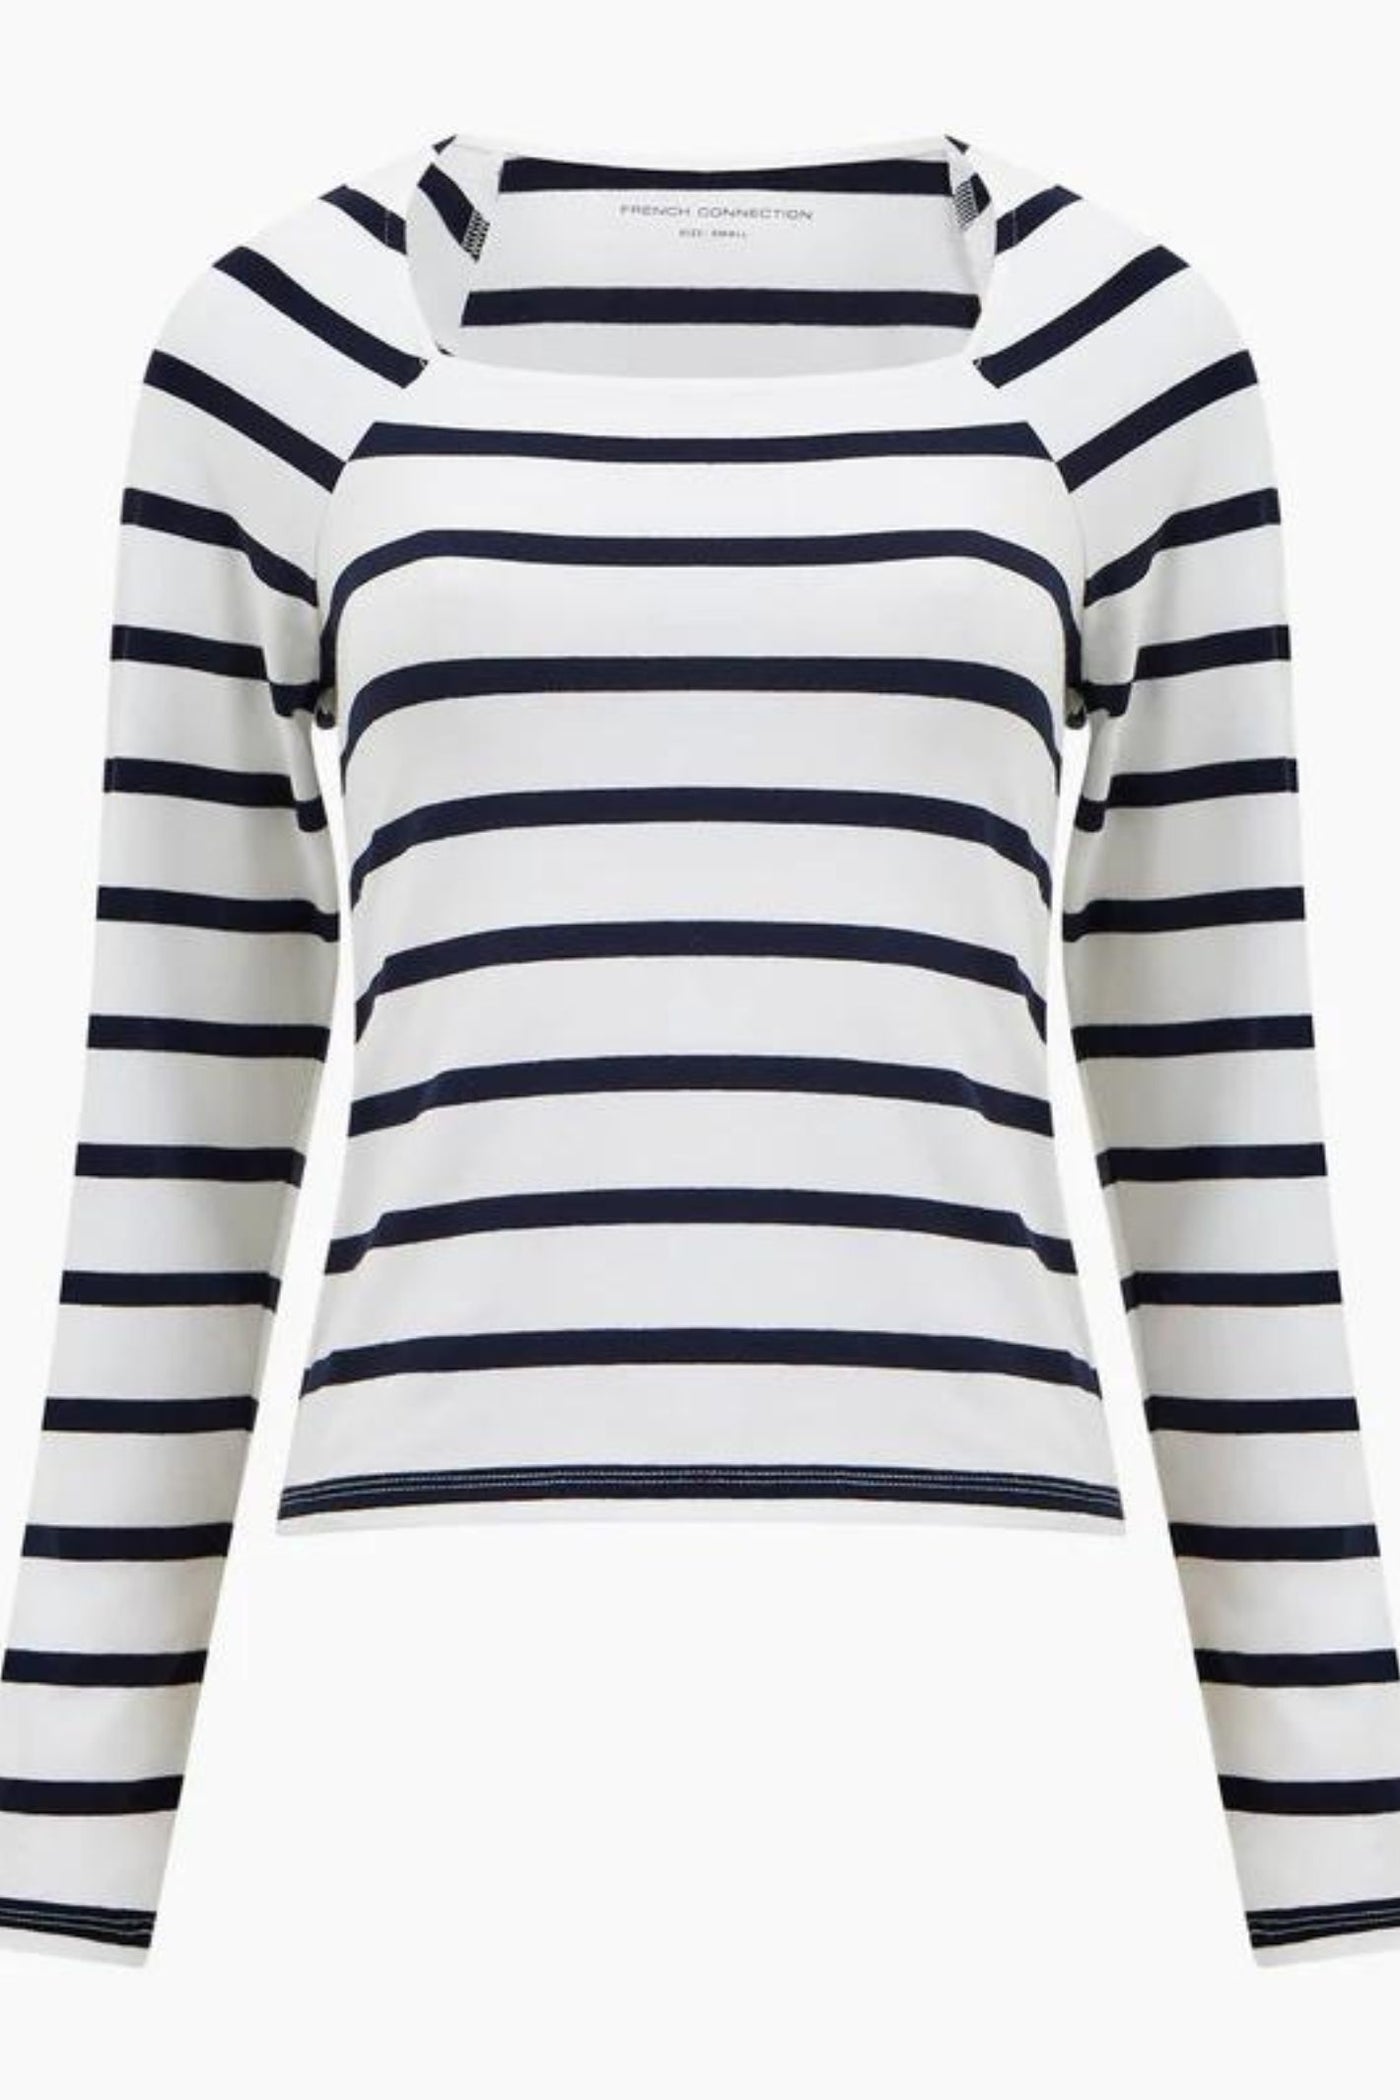 French Connection Rallie Stripe Square Neck Long Sleeve Top | Jezabel Boutique